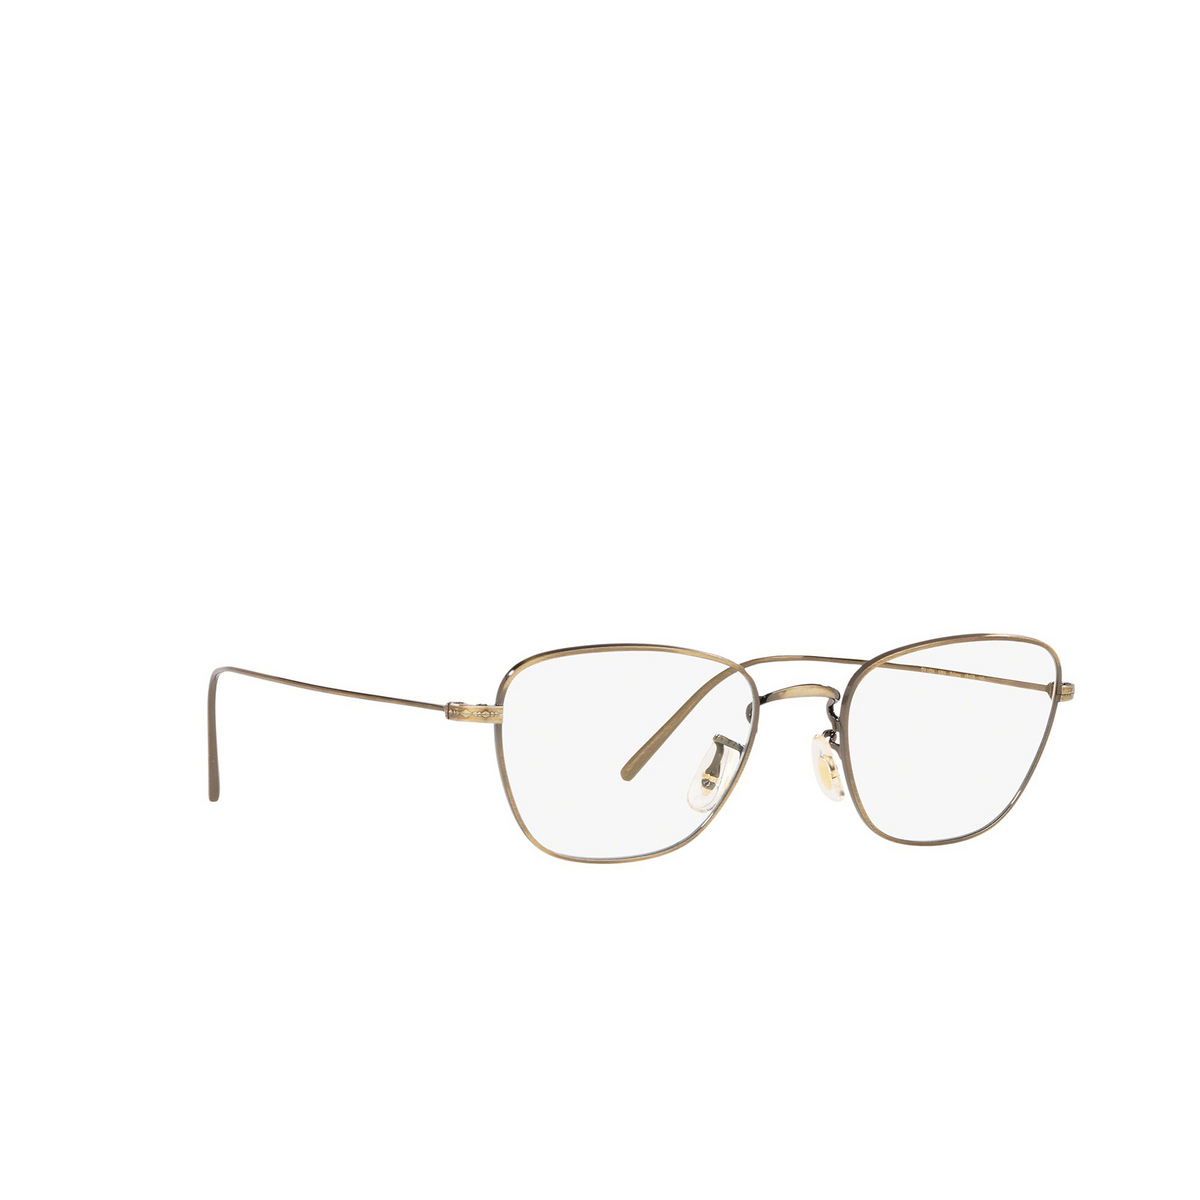 Oliver Peoples® Butterfly Eyeglasses: Suliane OV1254 color Antique Gold 5284 - three-quarters view.